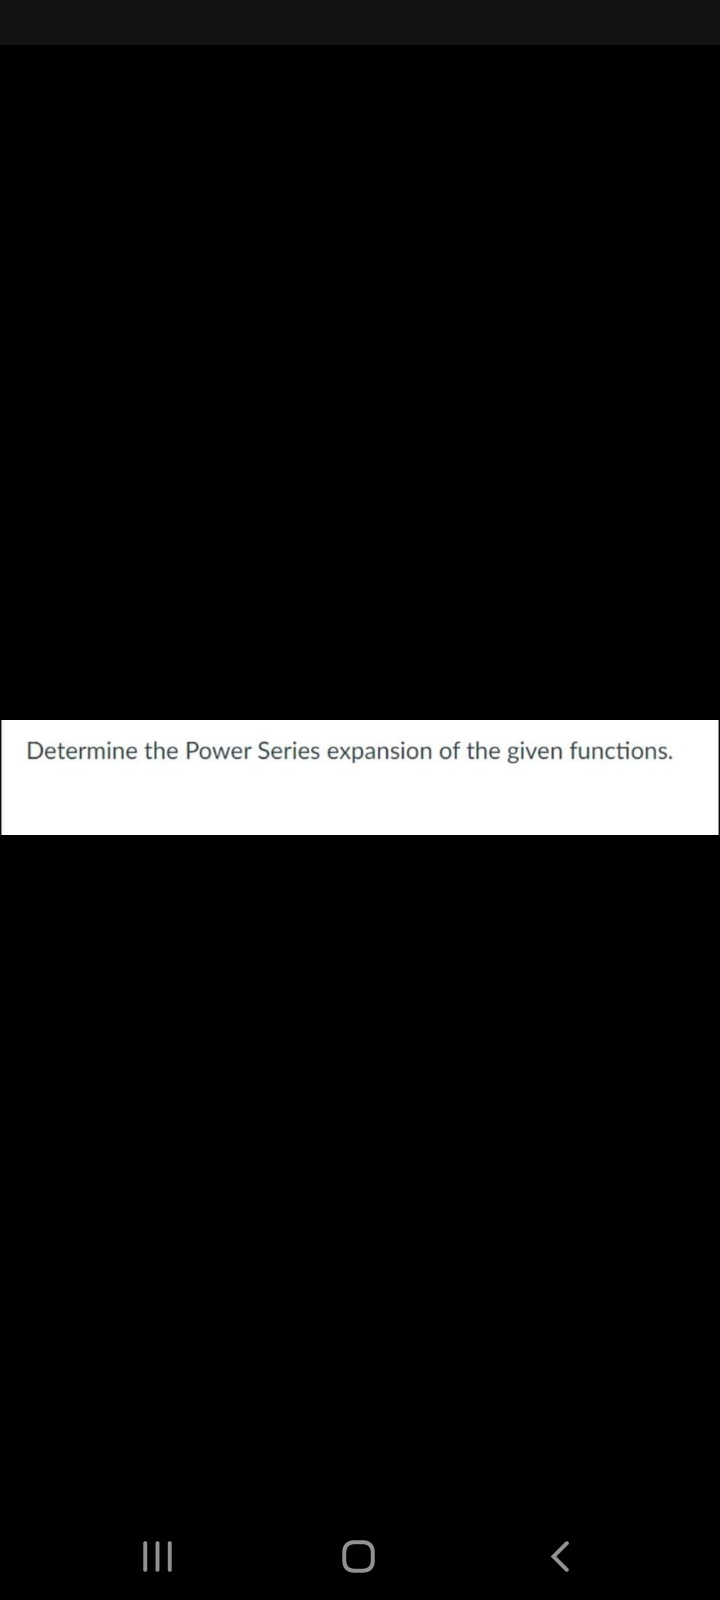 Determine the Power Series expansion of the given functions.
